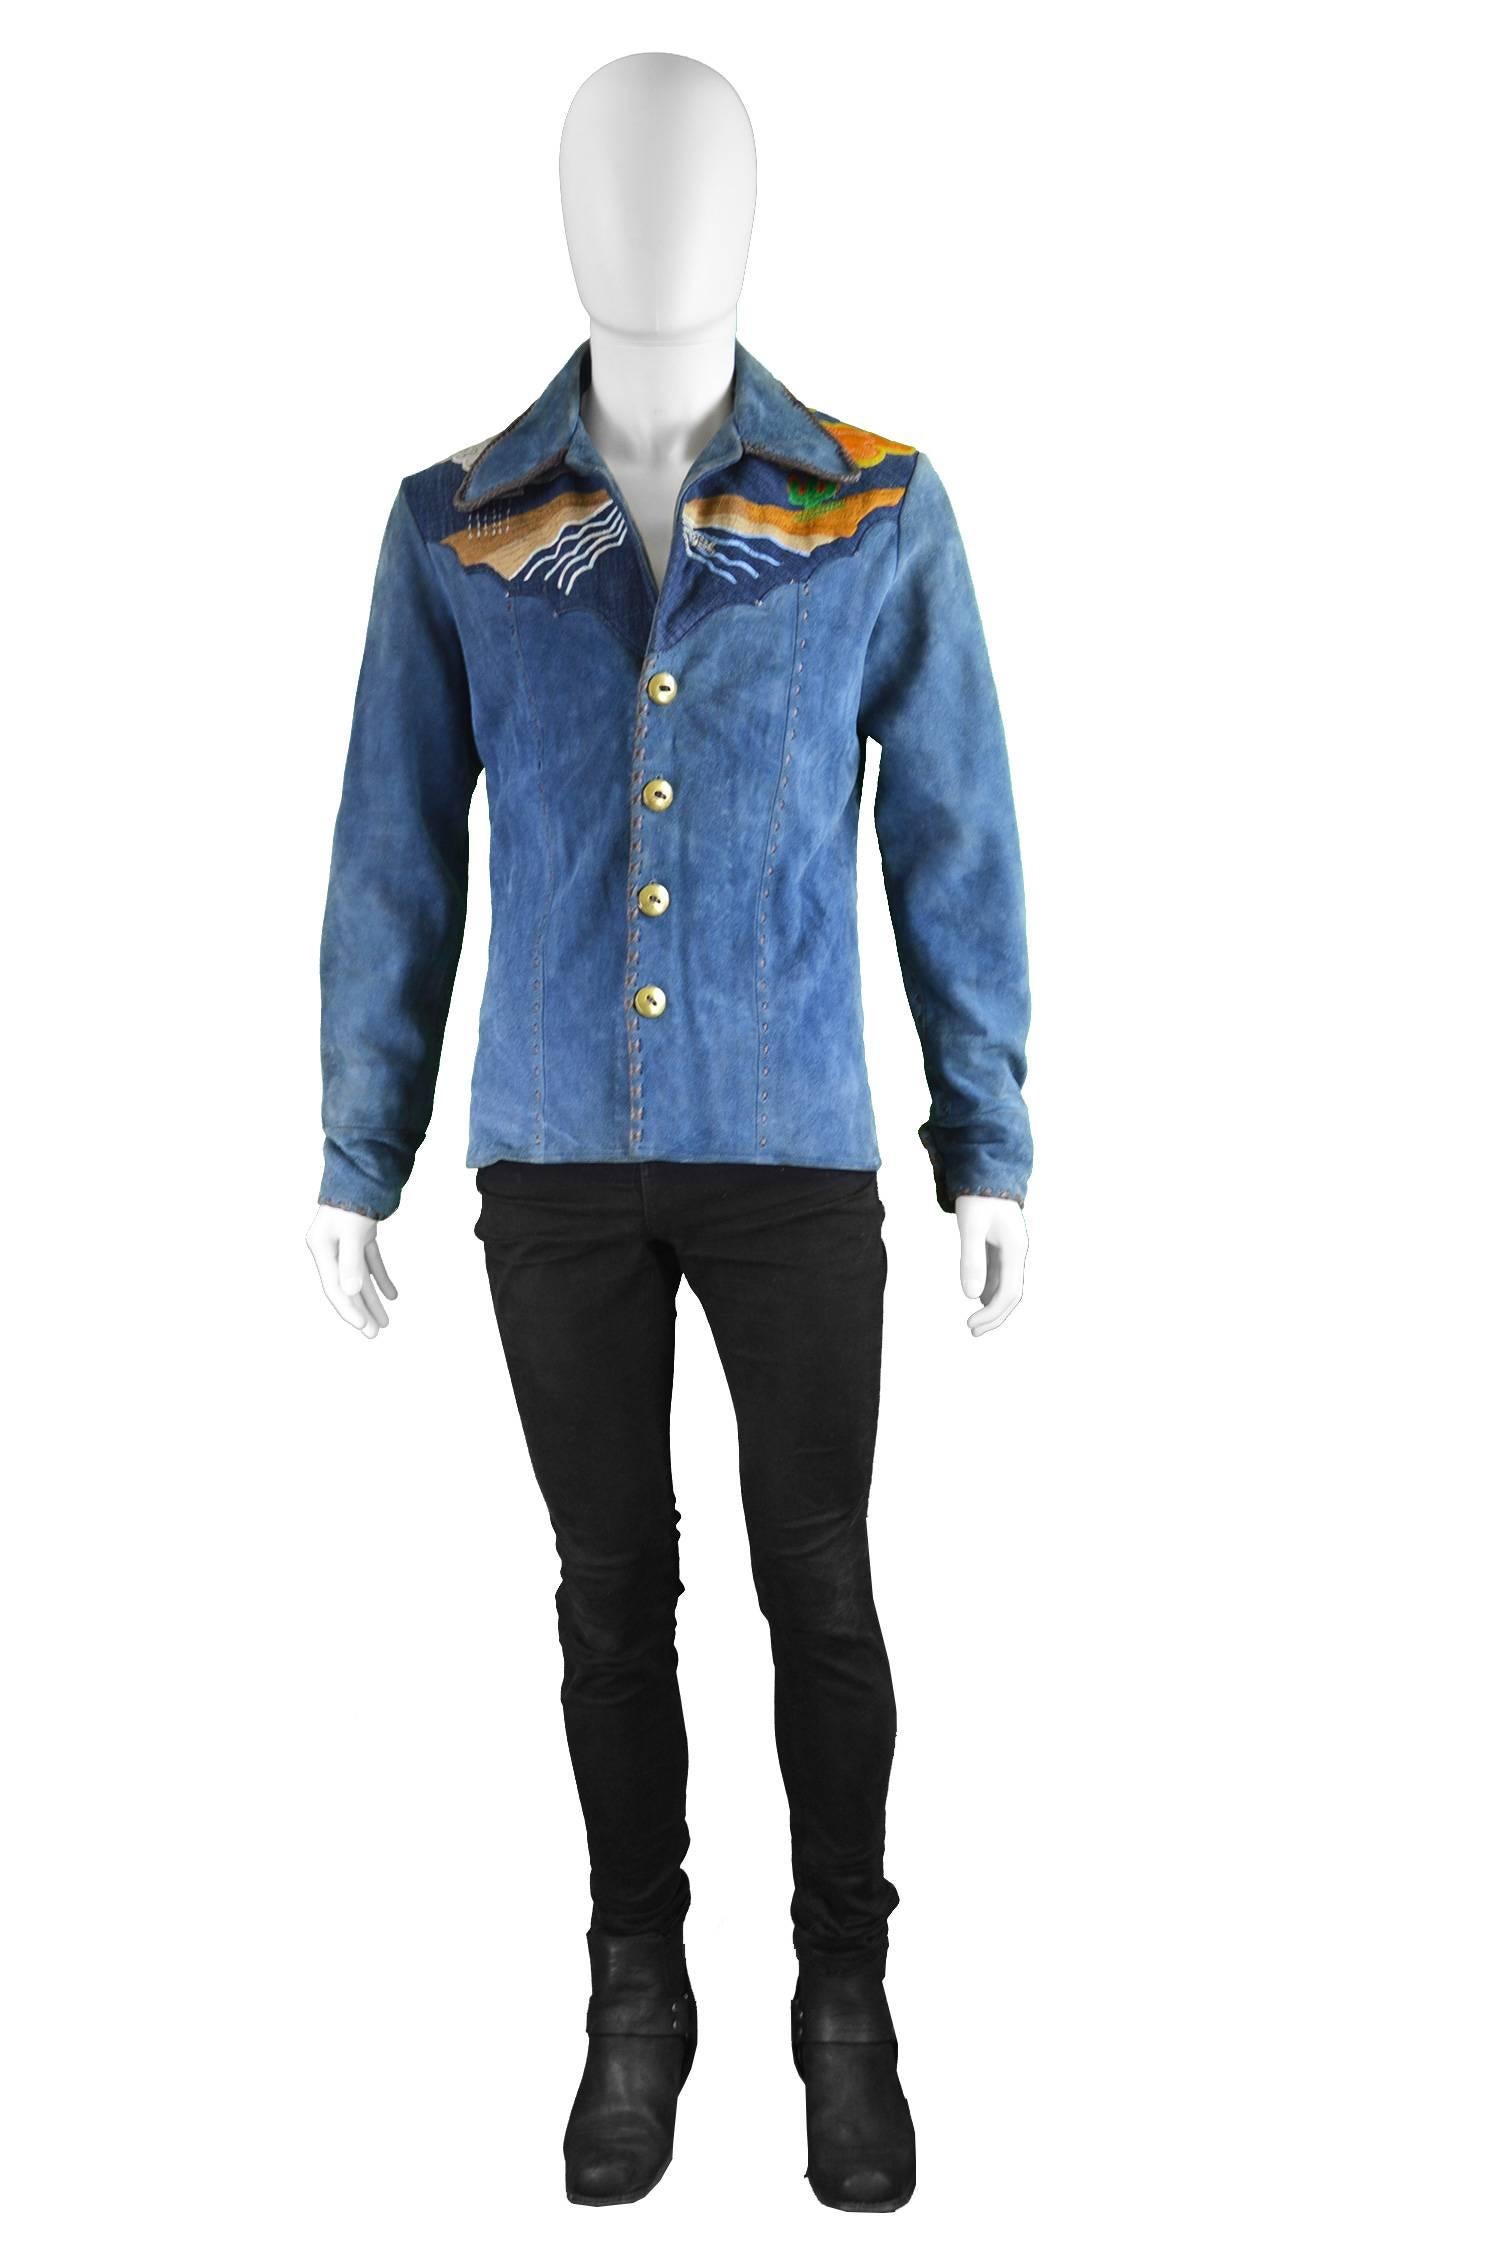 Handcrafted Men's Vintage Embroidered Whip Stitched Suede & Denim Jacket, 1970s

Estimated Size: Men's Small. Please check measurements to ensure fit.
Chest - 40” / 101cm (please allow a couple of inches room for movement underneath)
Waist - 34”